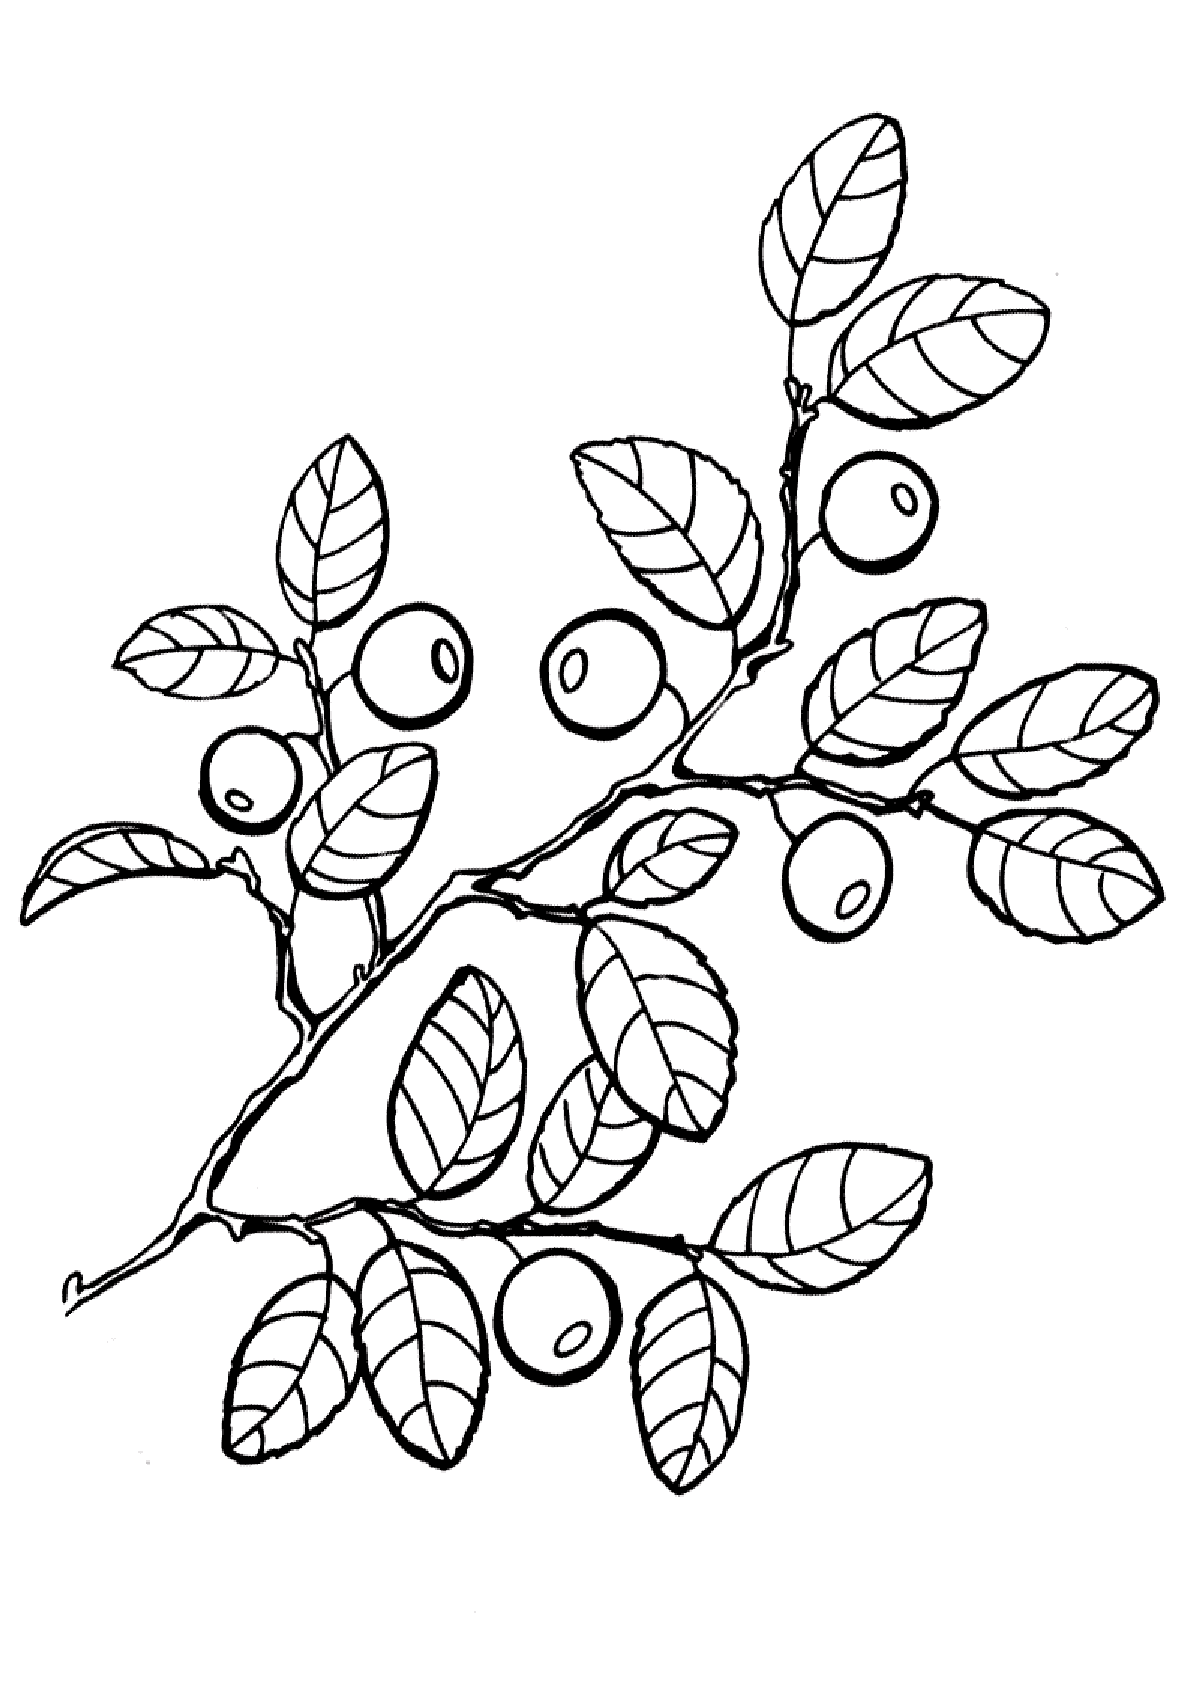 free coloring pages download coloring pages free coloring pages to download print pages download coloring free 